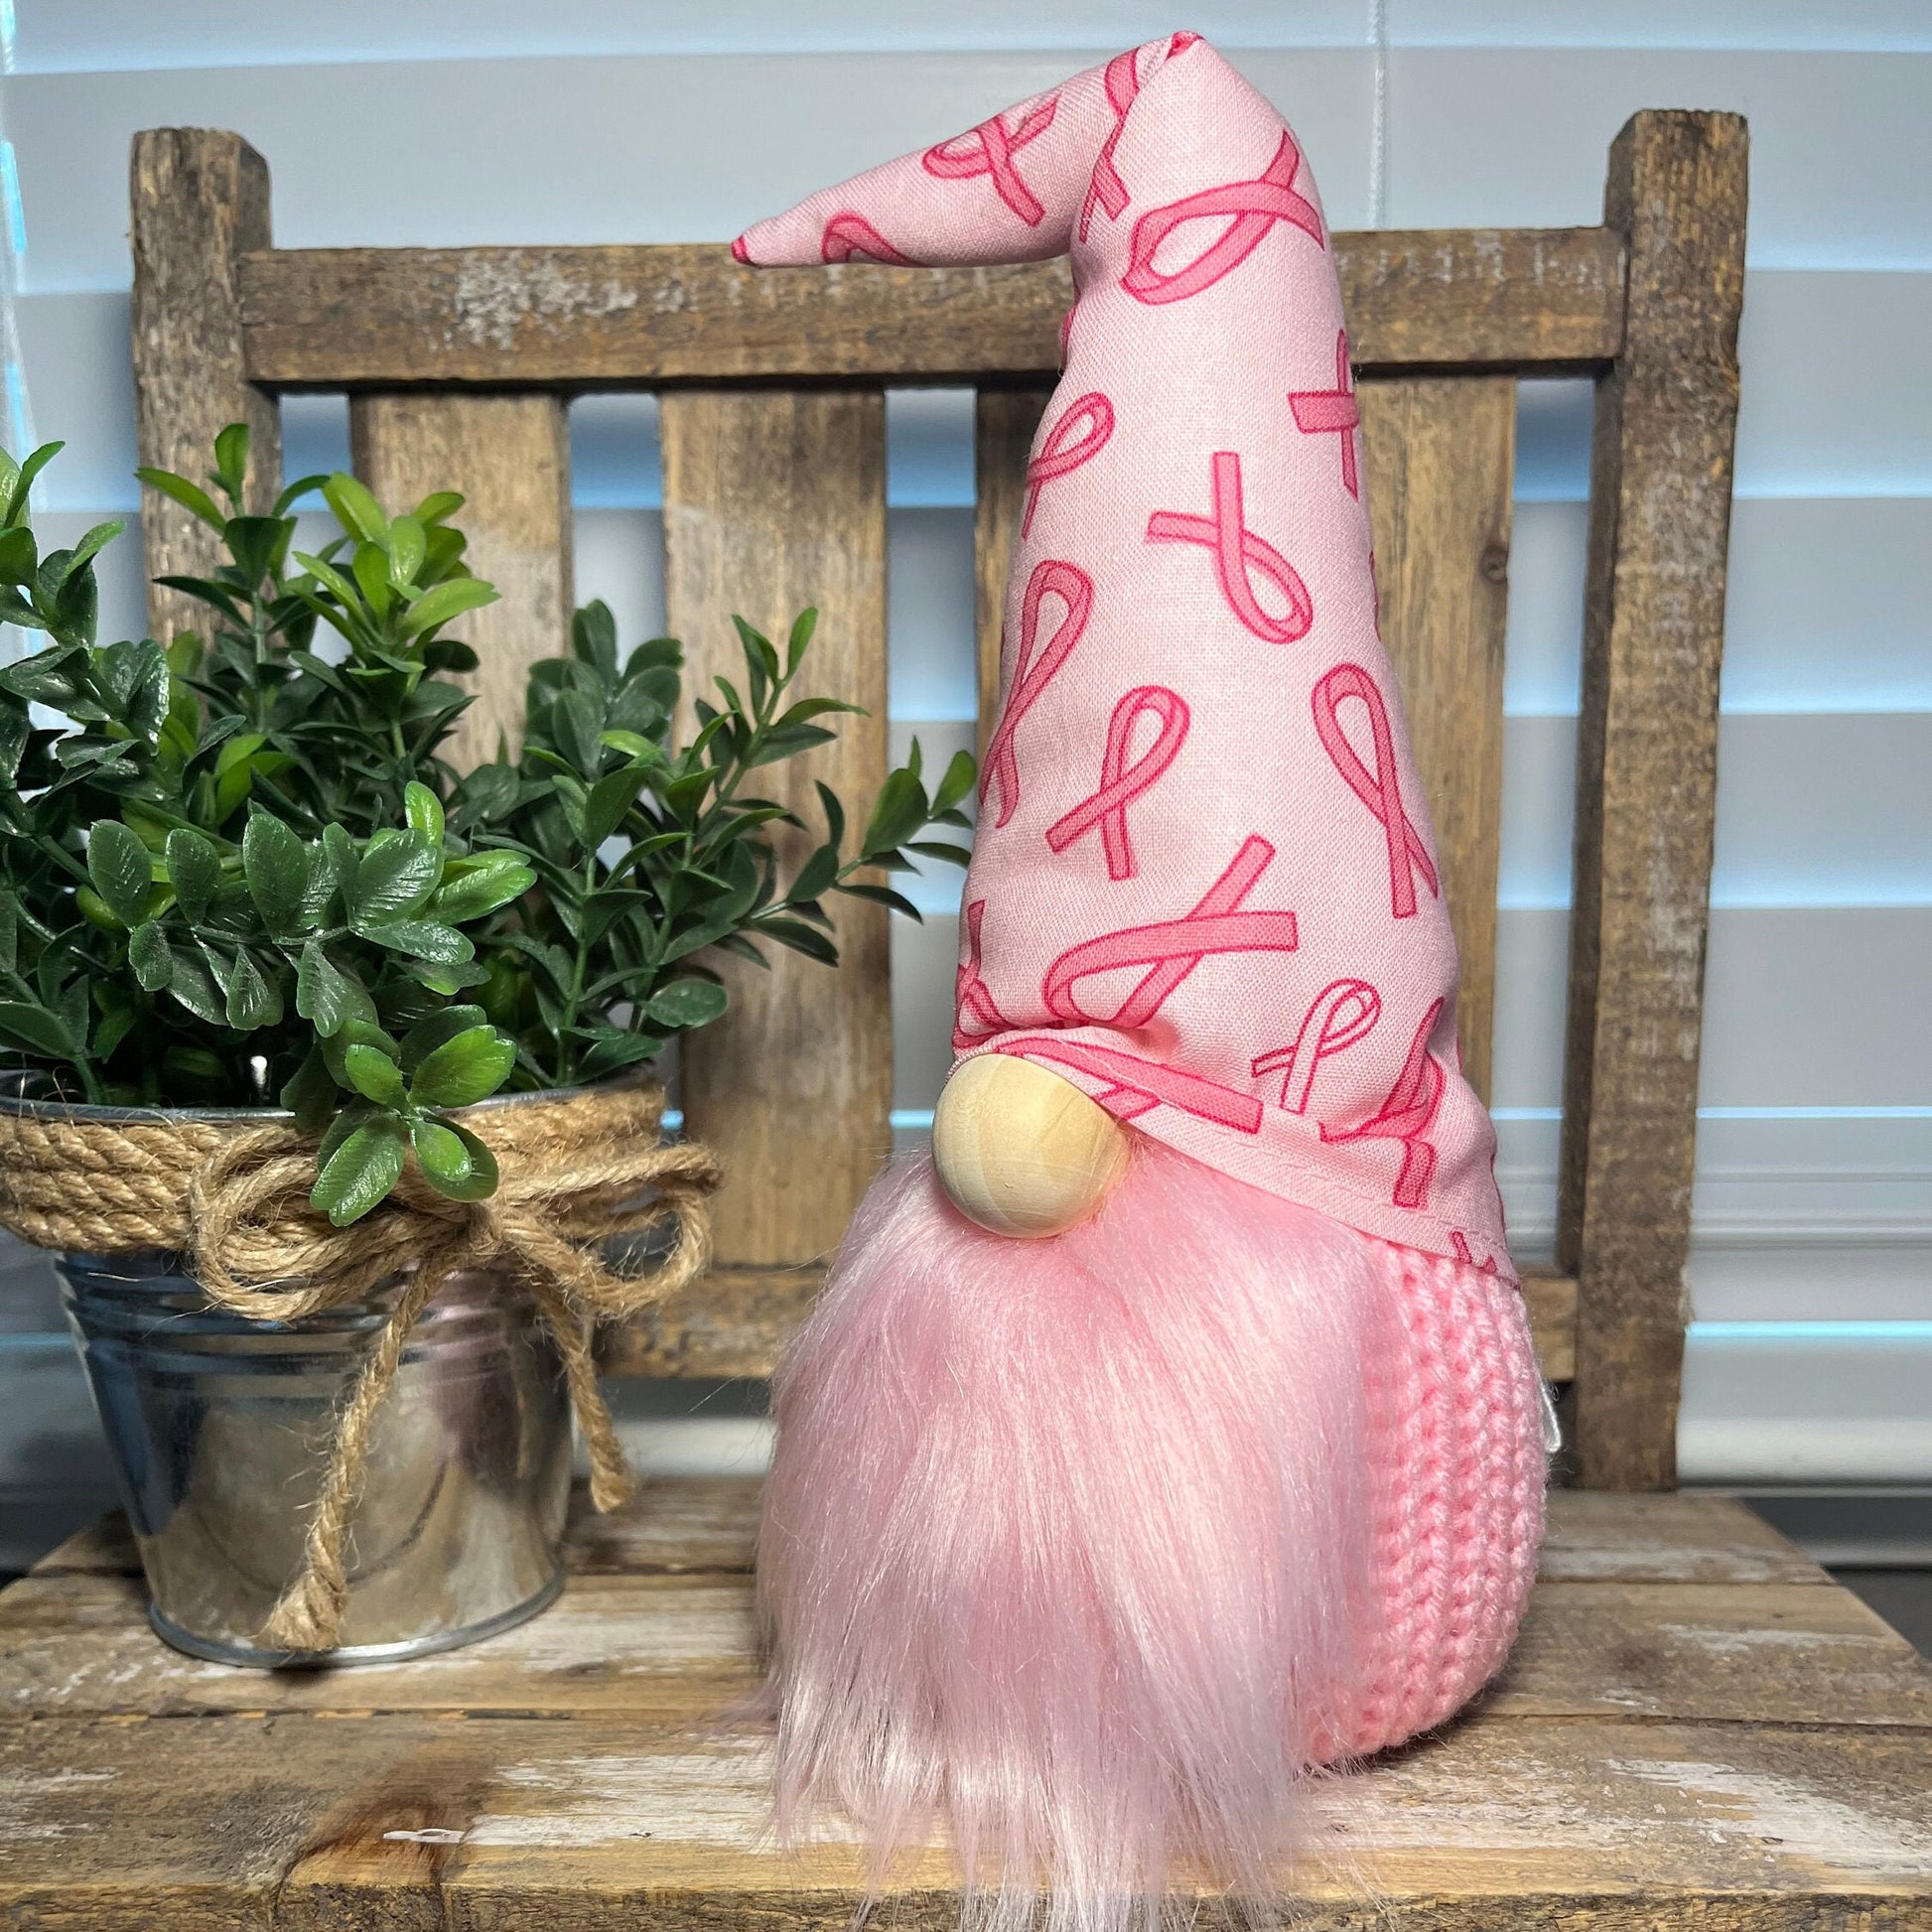 Hopeful Hearts Pink Ribbon Gnome / Autumn Tiered Tray Decor / Rustic Farmhouse Decorations / Breast Cancer Awareness & Support